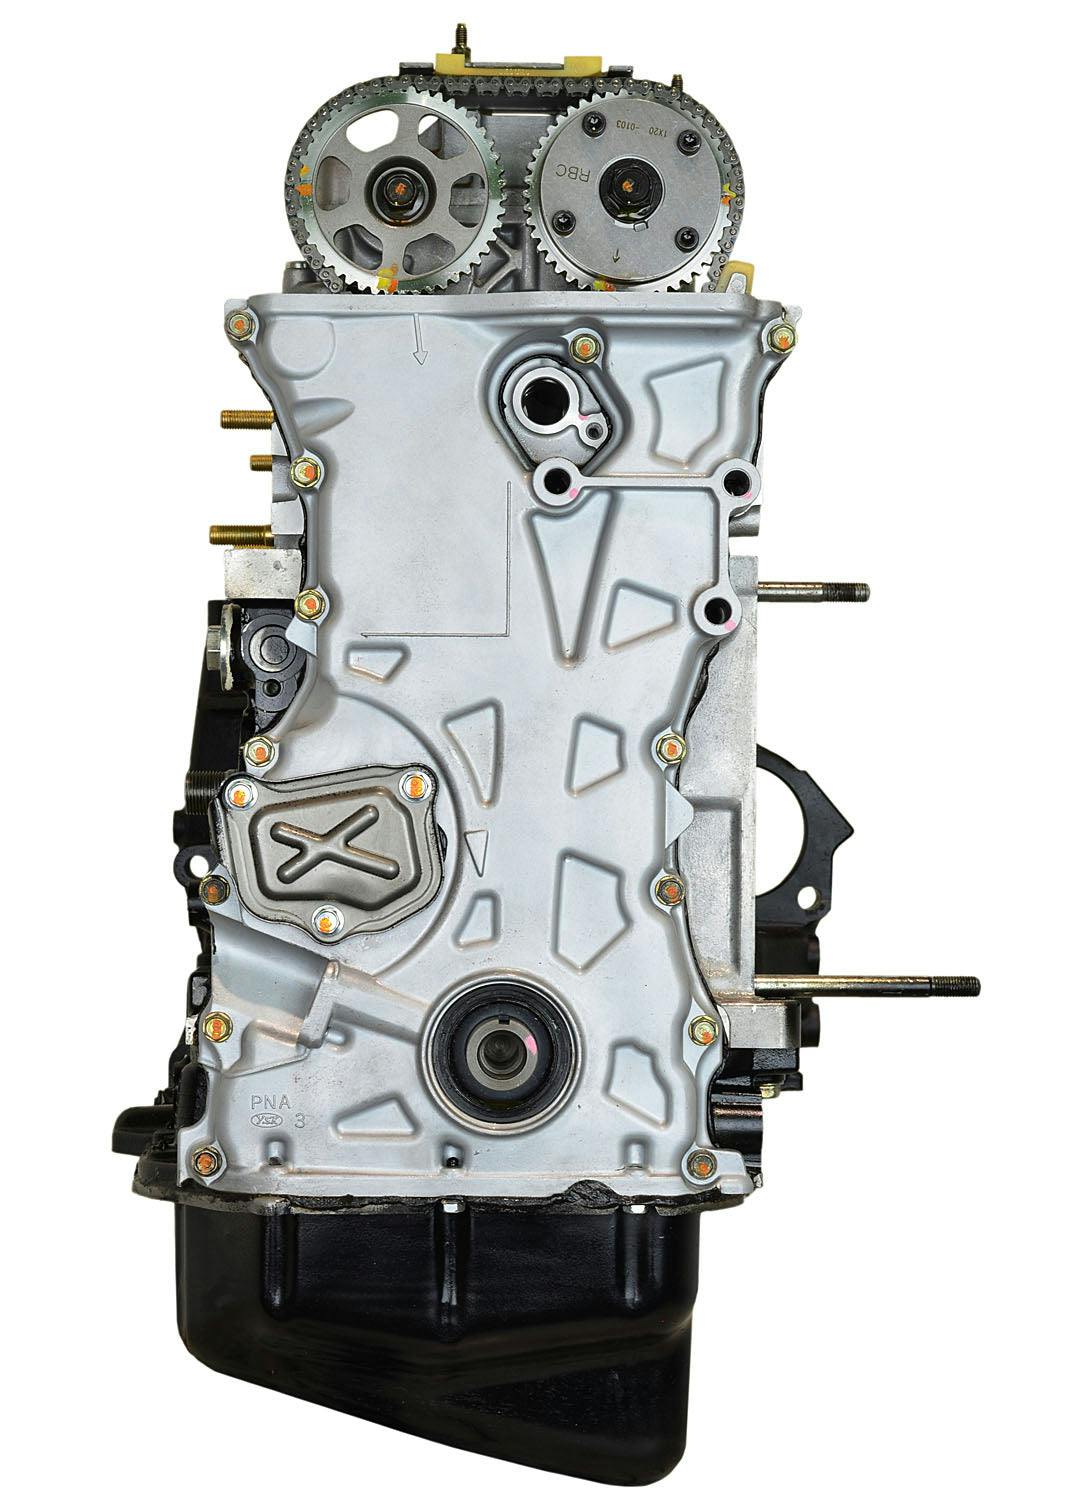 2L Inline-4 Engine for 2002-2006 Acura RSX